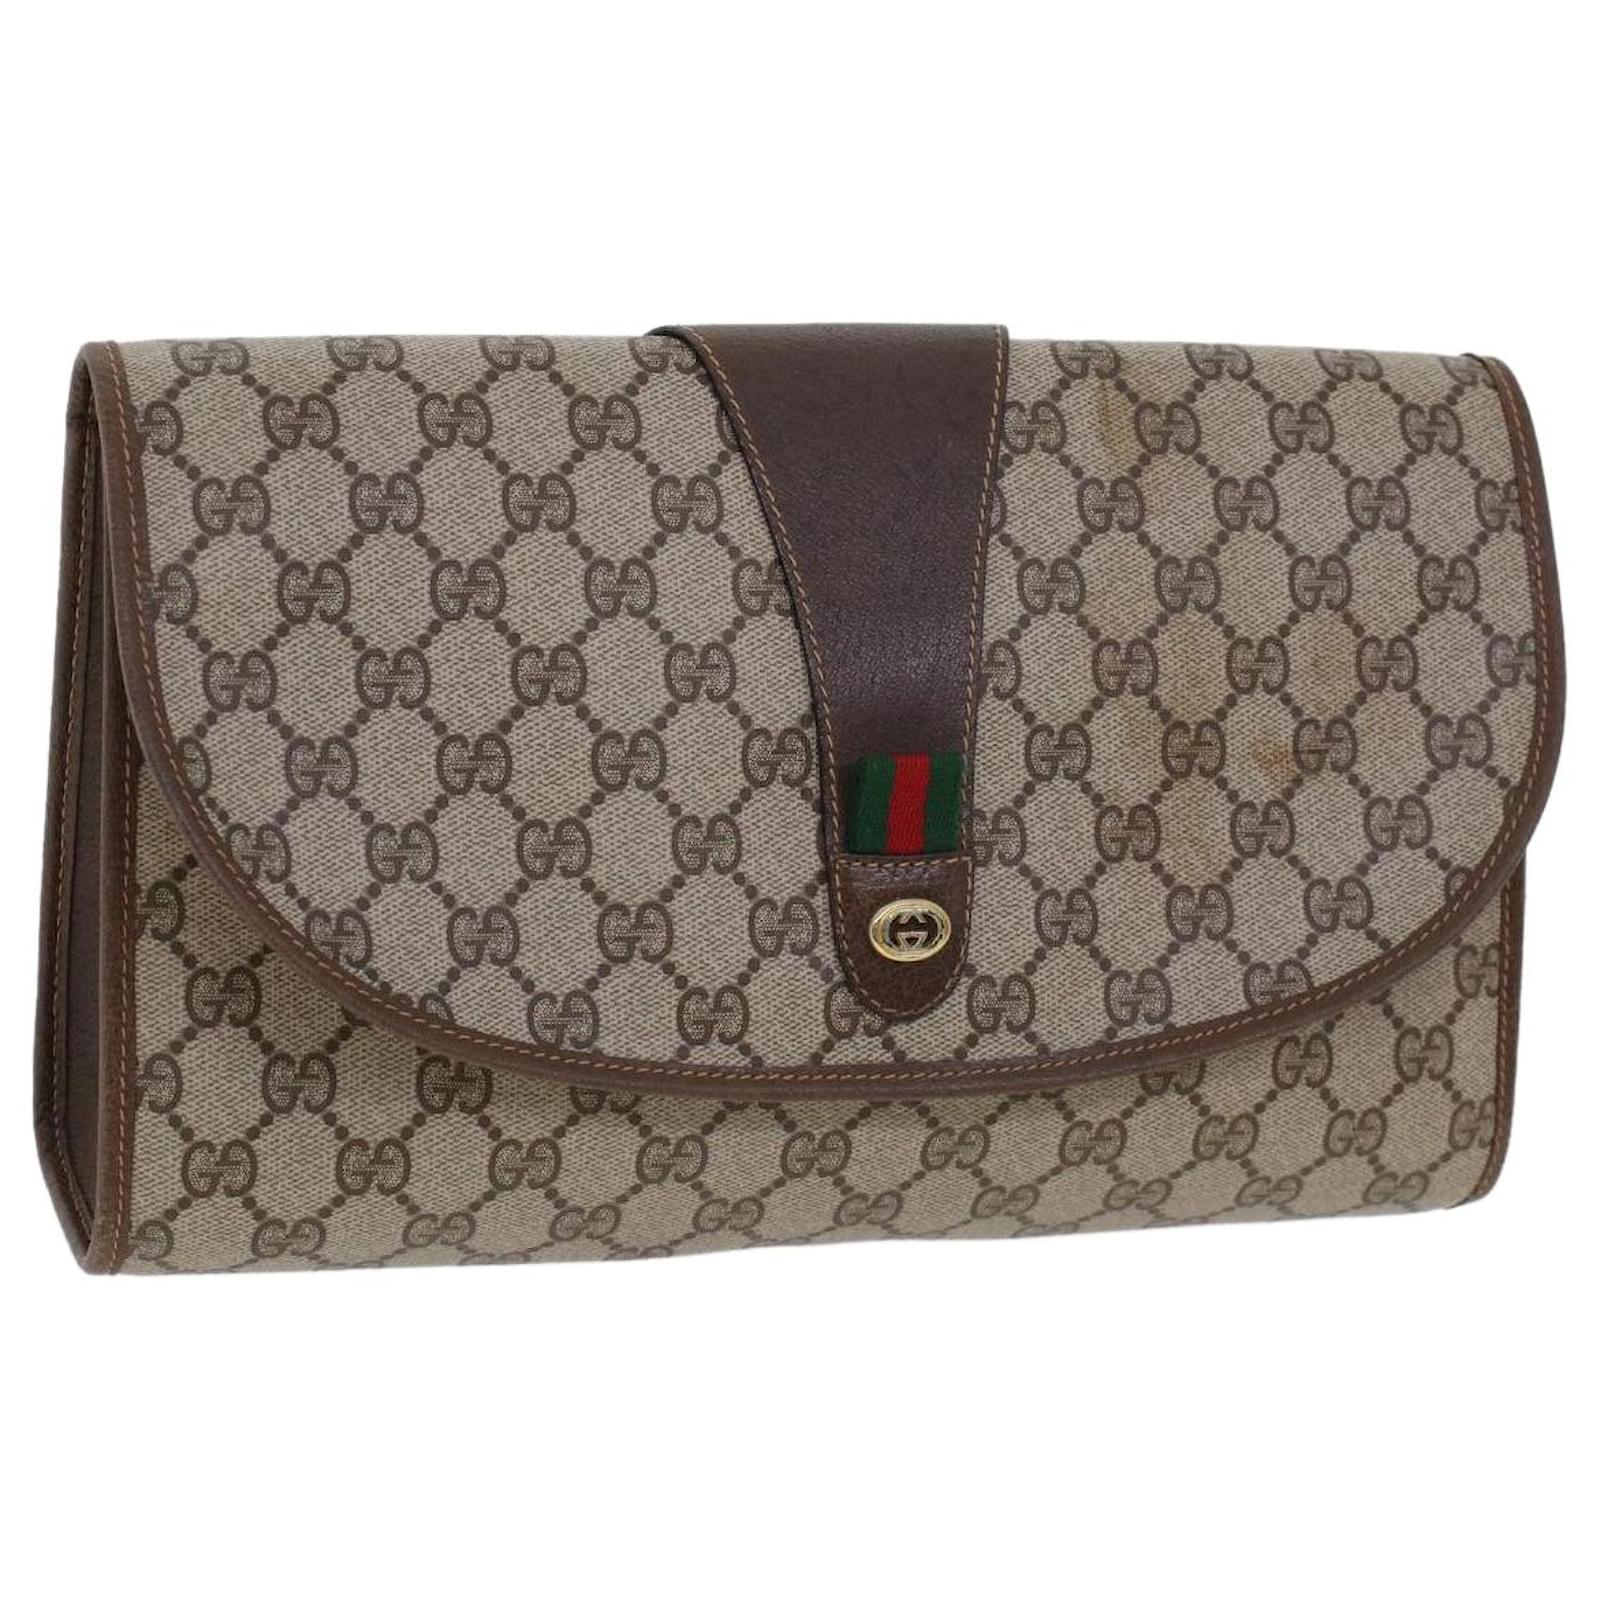 Vintage Gray Purse With Red And Green Stripe By Gucci